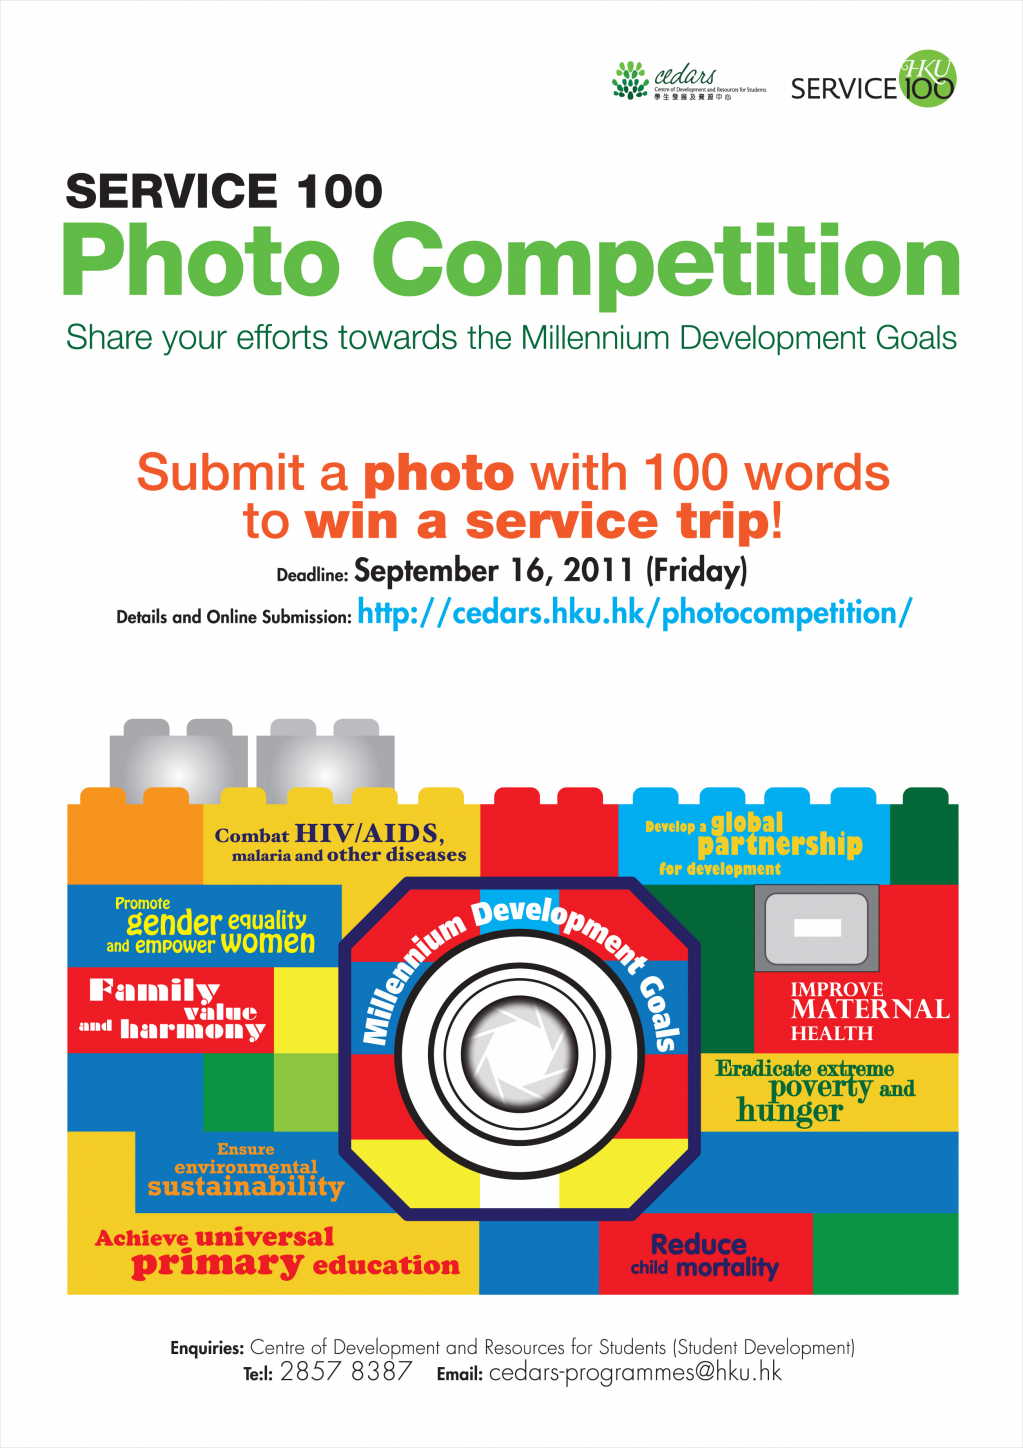 SERVICE 100 Photo Competition: Action now! Submit your photo to win a service trip!